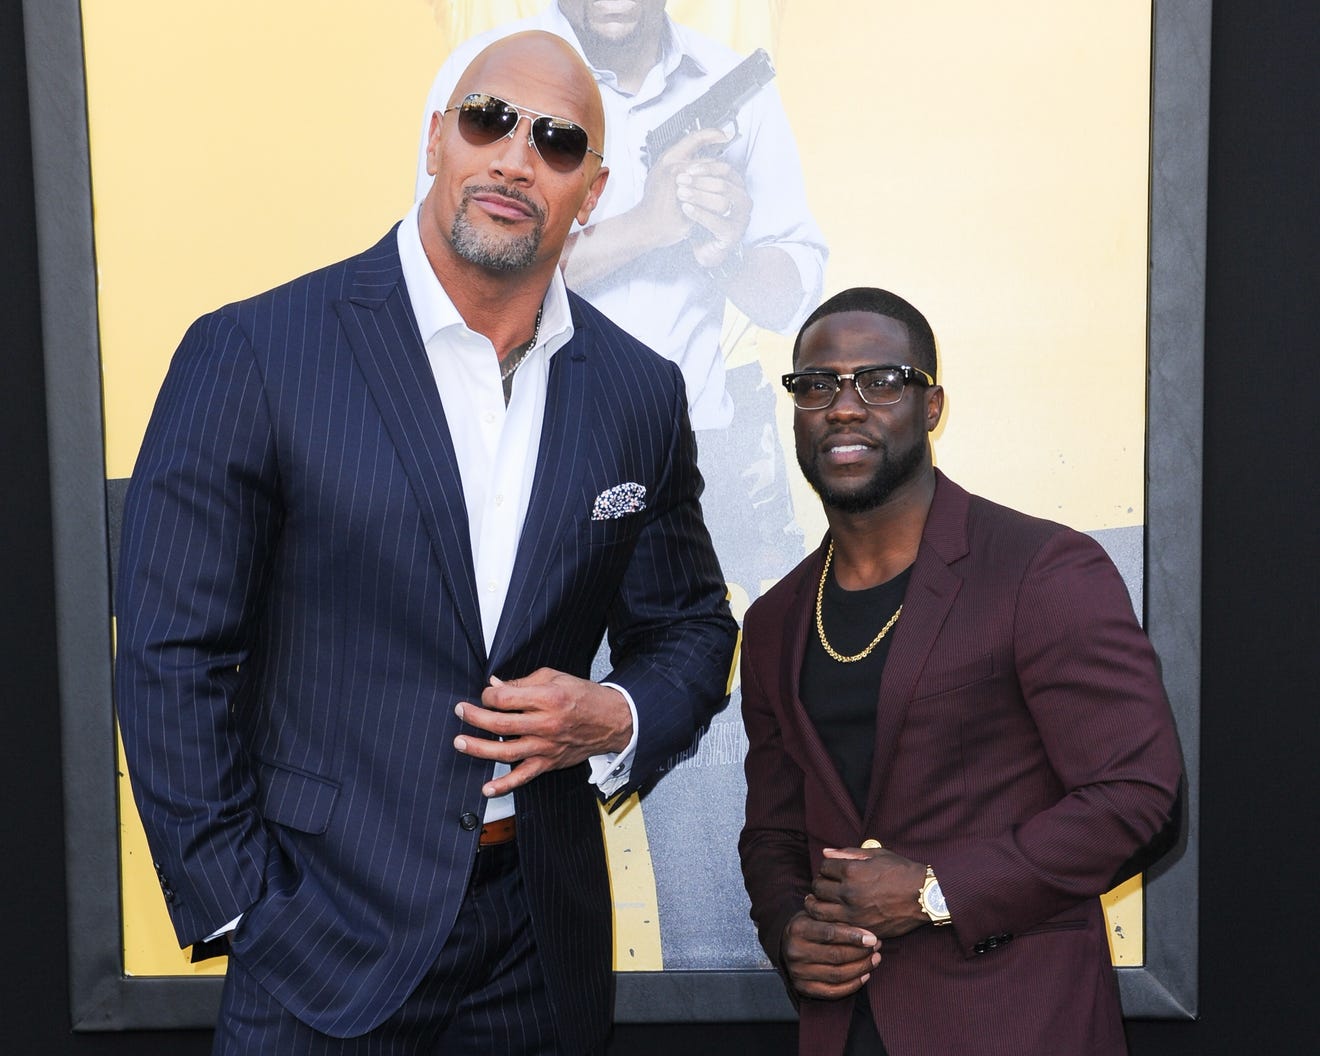 Kevin Hart update: Dwayne The Rock Johnson says 'he's doing very well'